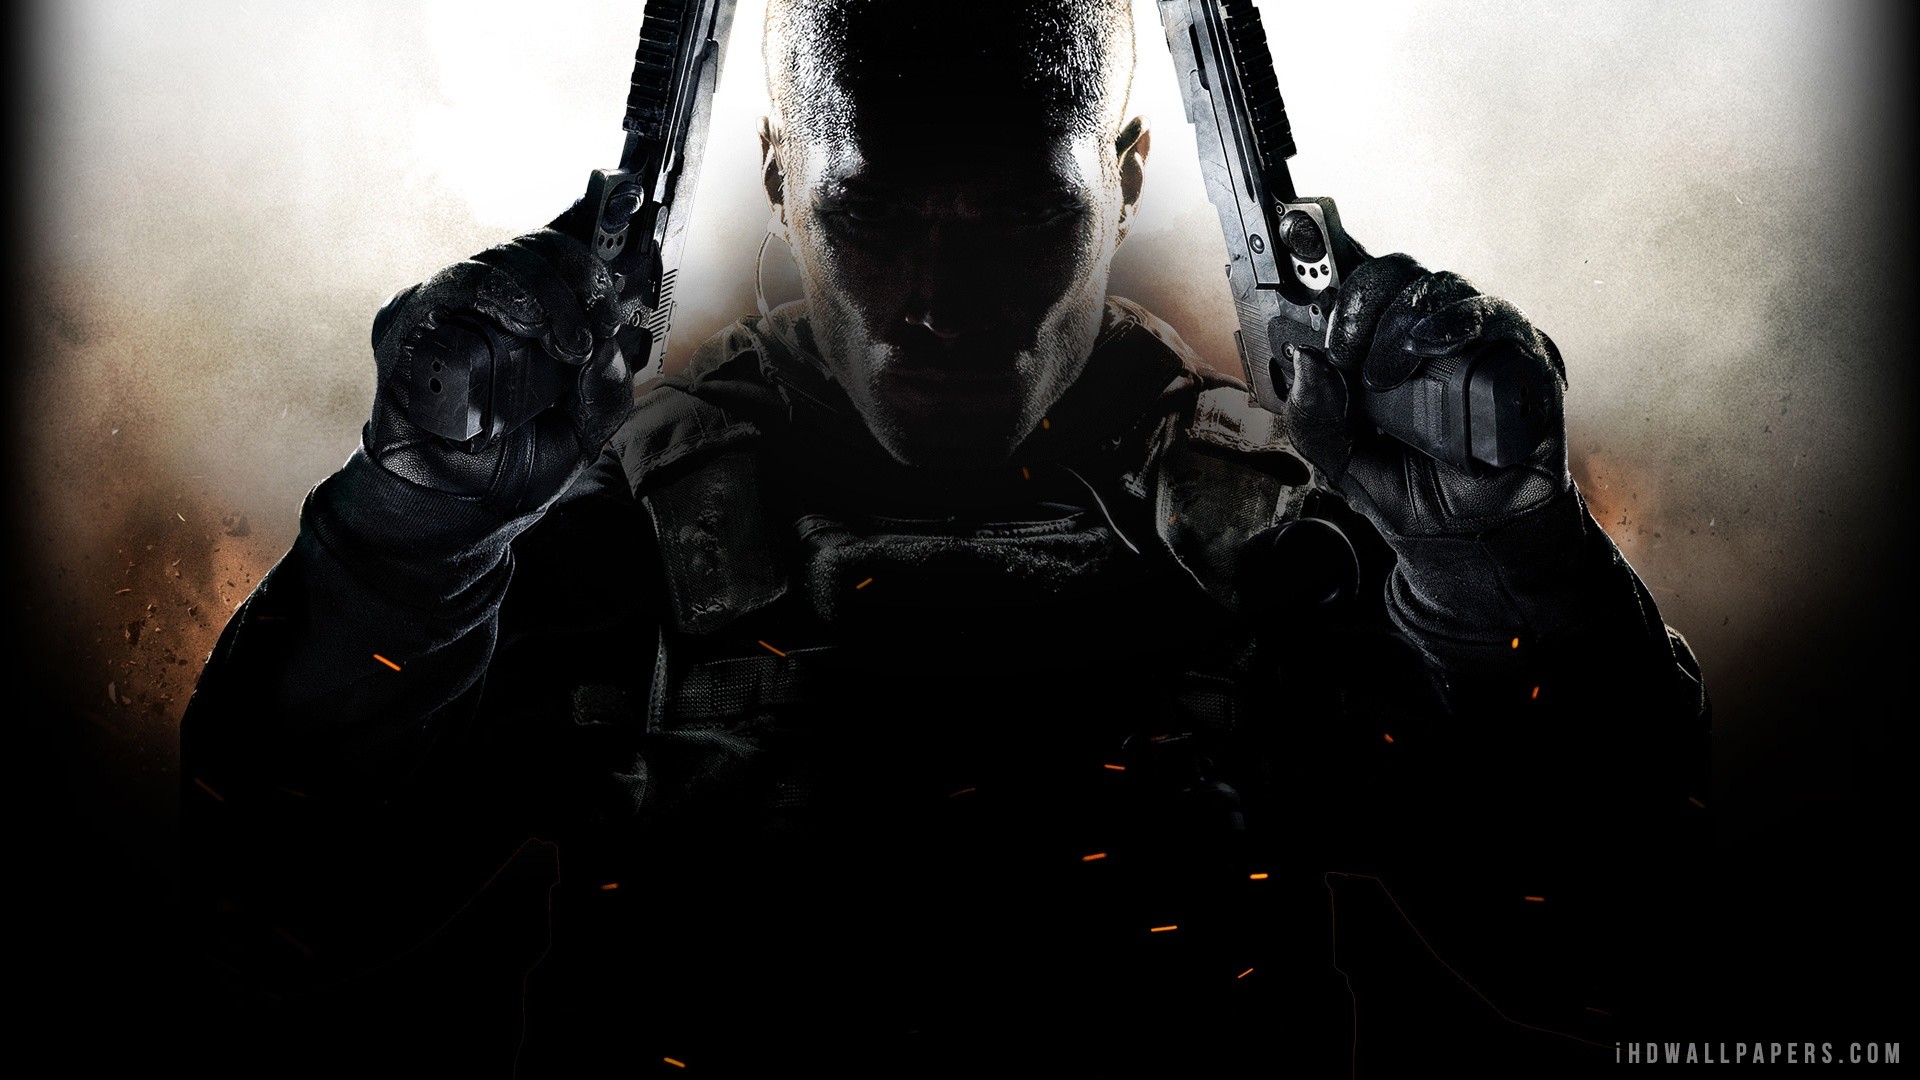 cod zombies iphone wallpaper,black,darkness,digital compositing,outerwear,fictional character